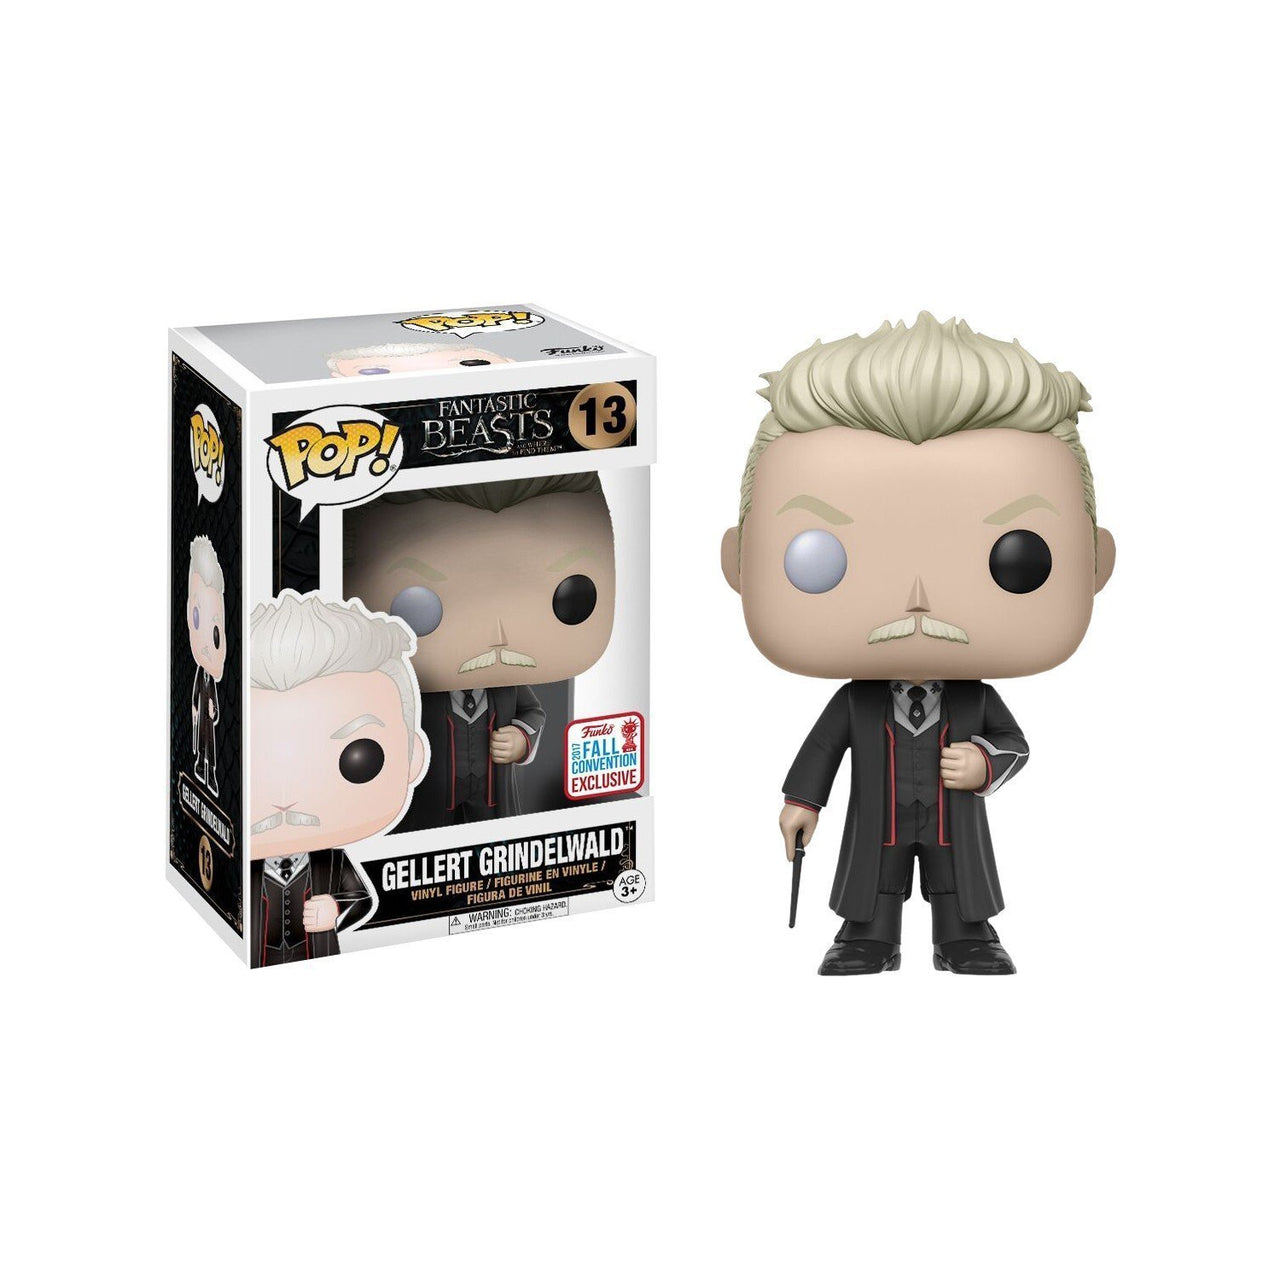 Funko Pop! Movies Fantastic Beasts: Gellert Grindelwald, Limited Edition Fall Convention Exclusive - Nerd Arena